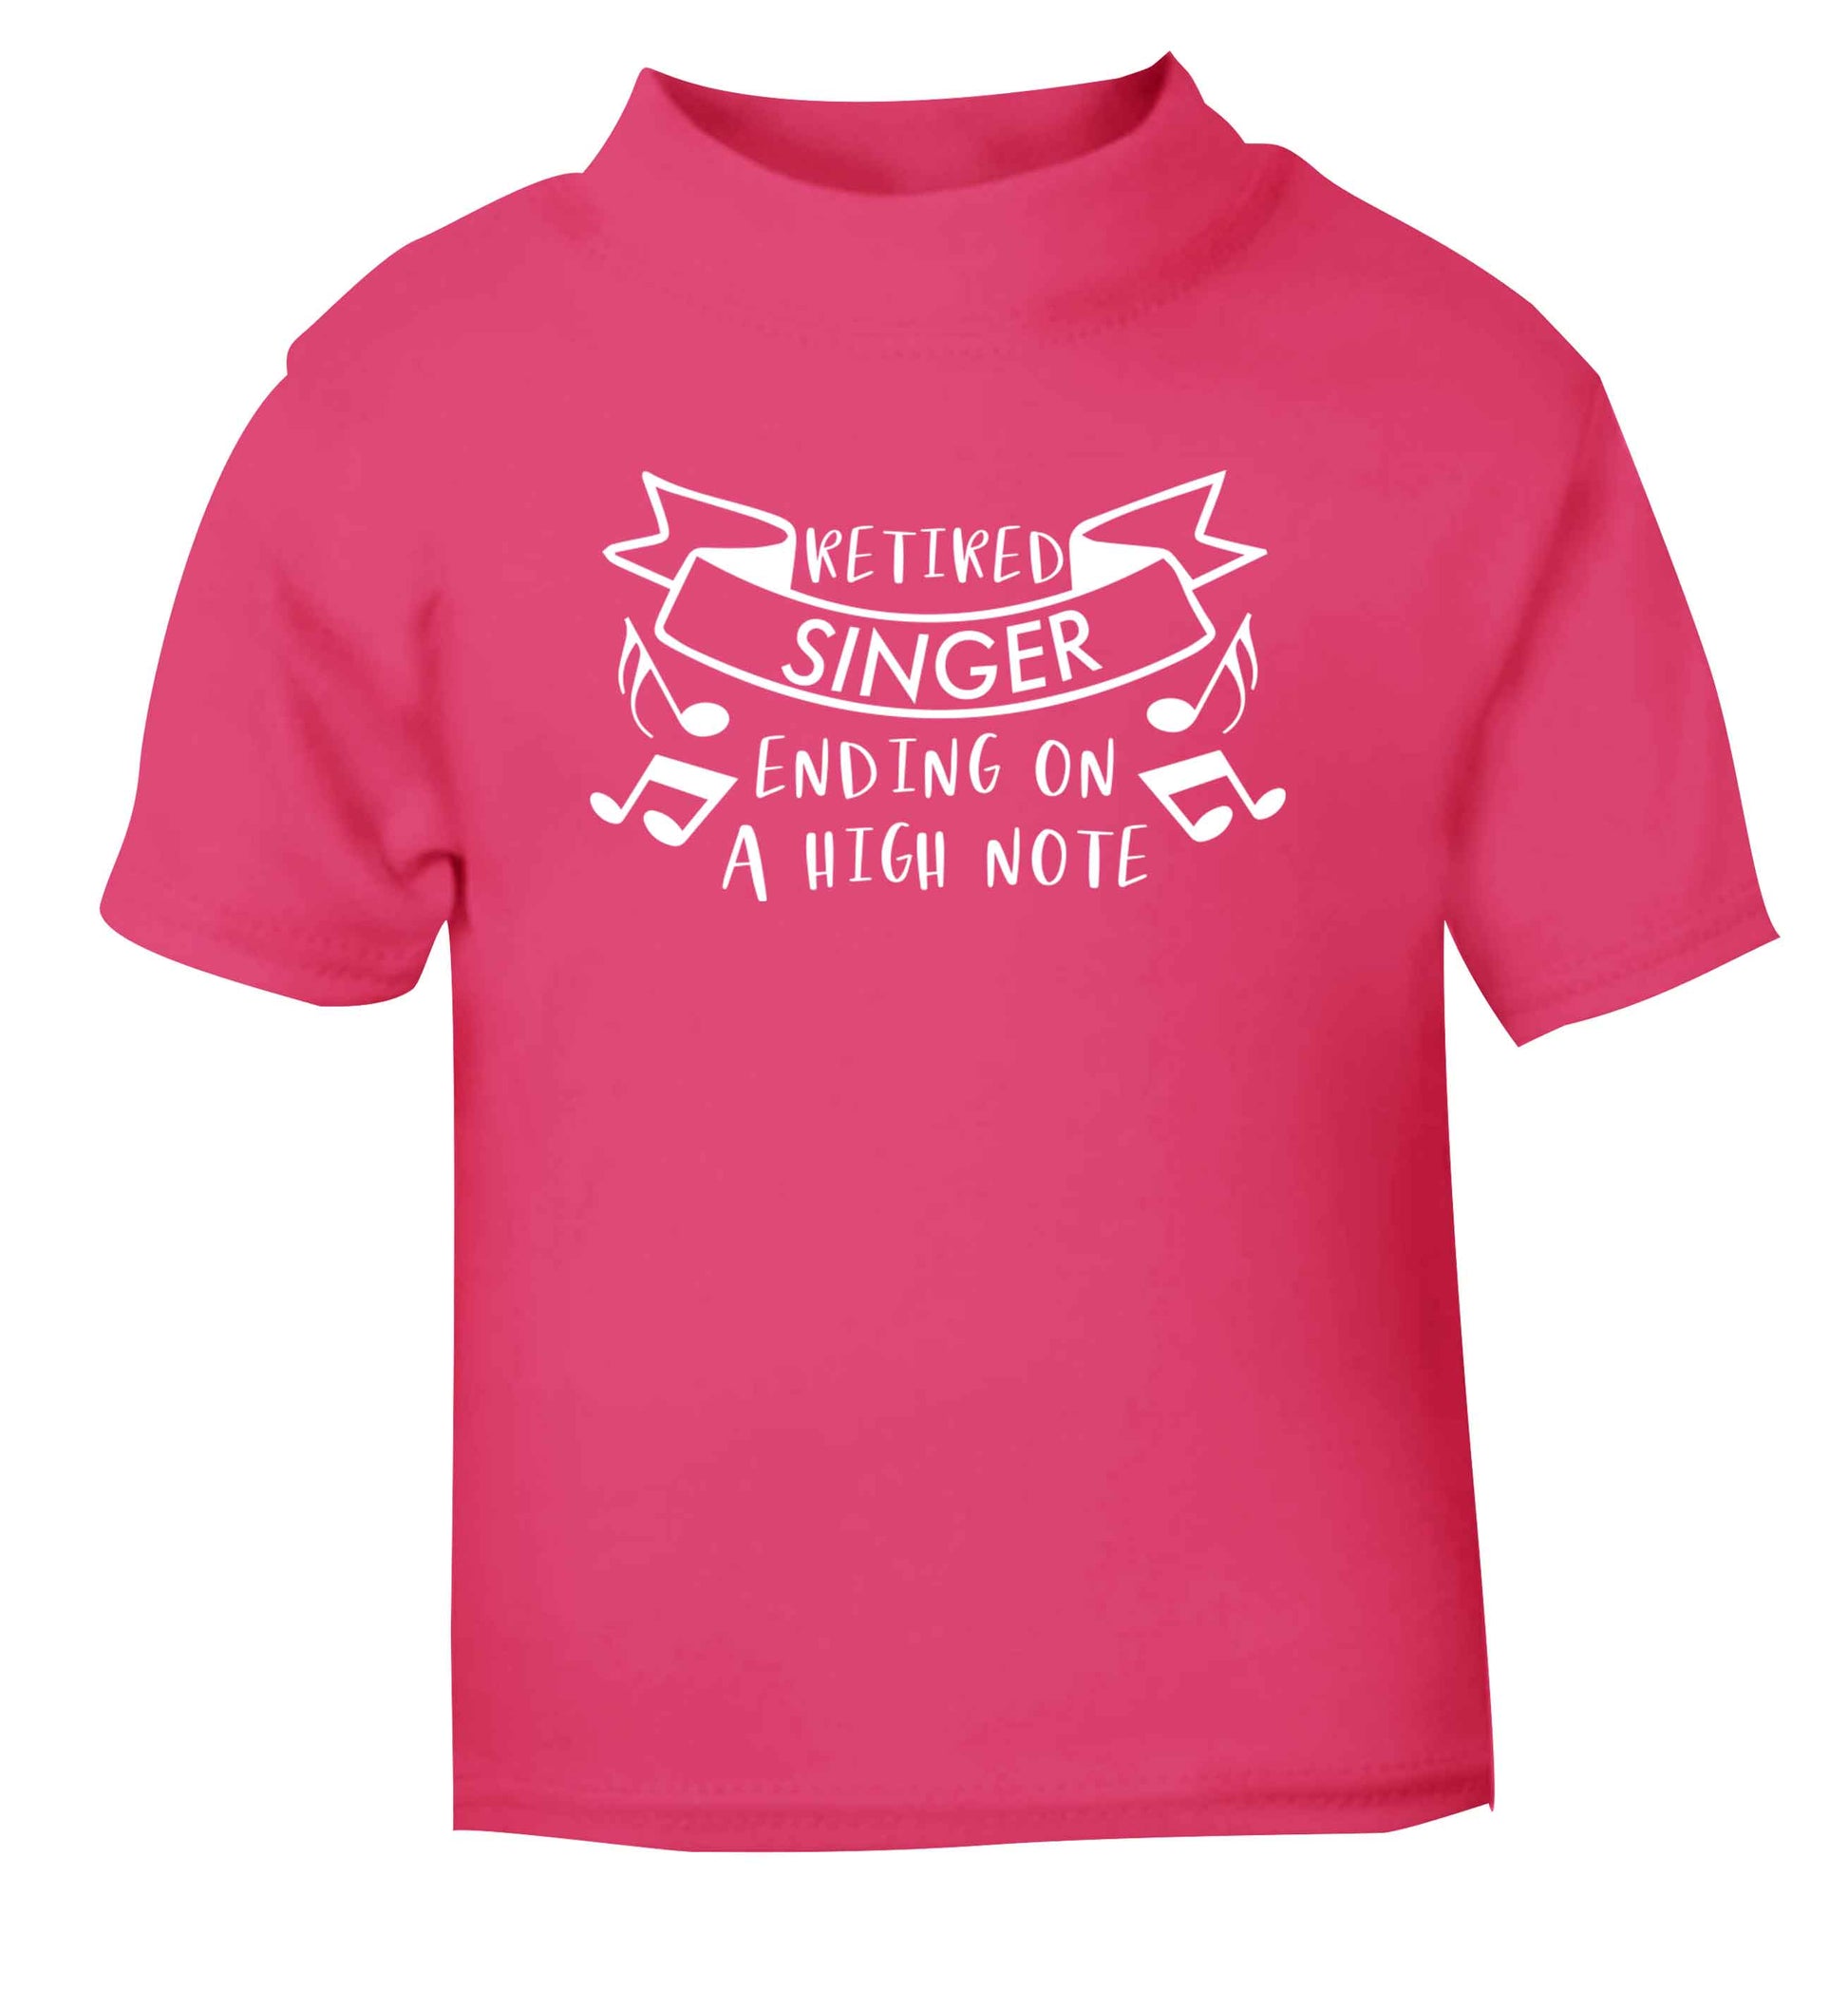 Retired singer ending on a high note pink Baby Toddler Tshirt 2 Years